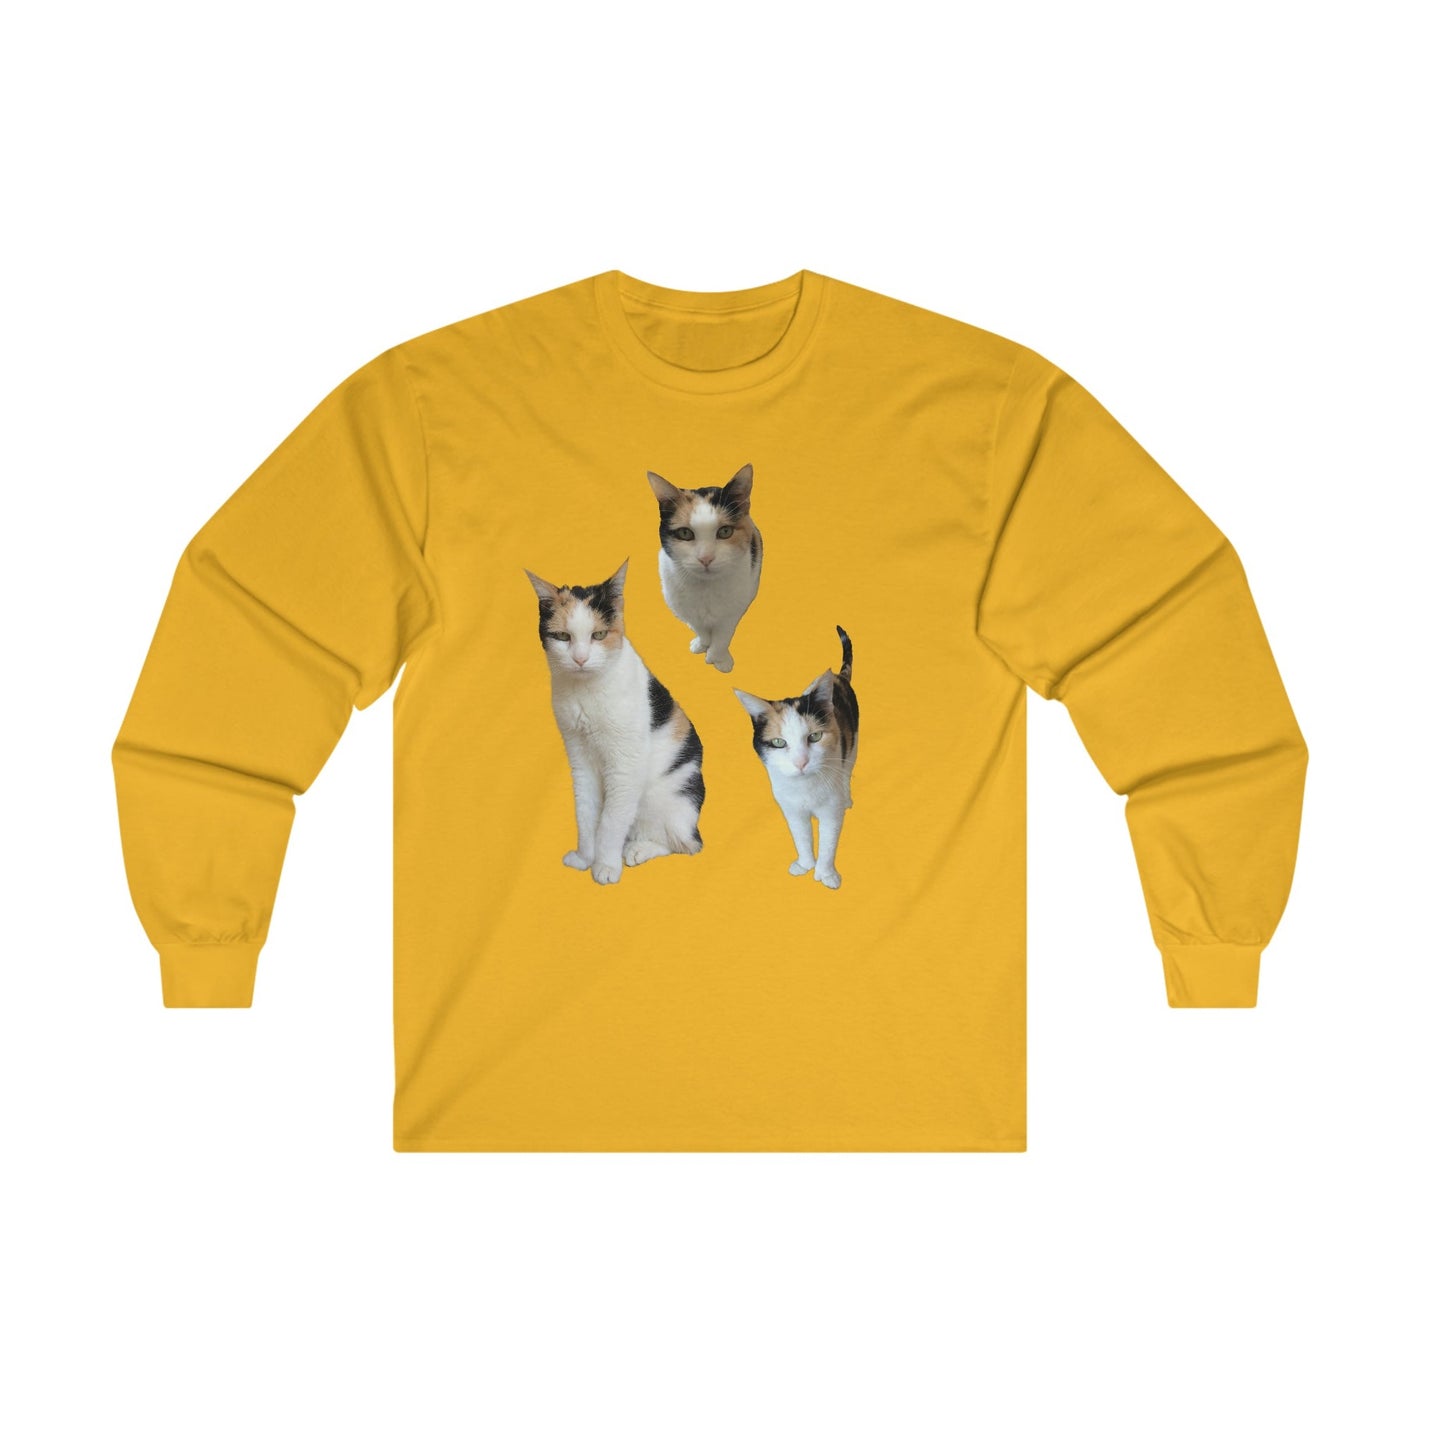 A comfy longsleeve t shirt with three images of beautiful cats in different poses, looking at you